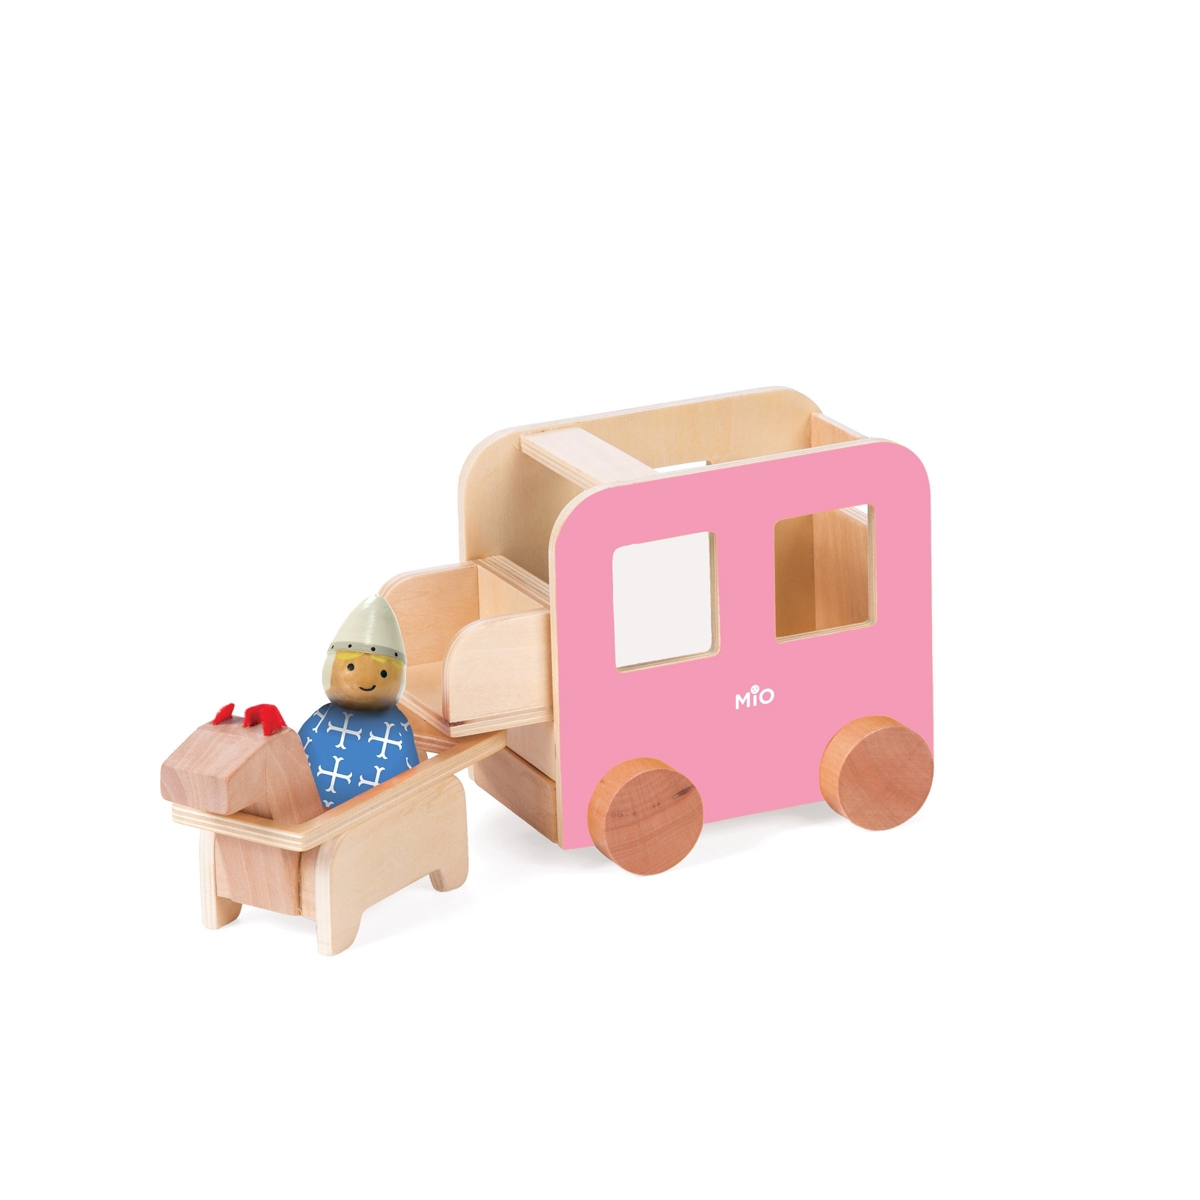 Manhattan Toy Company Manhattan Toy Mio Wooden Carriage Horse 1 Person Imaginative Play Kit In Multi